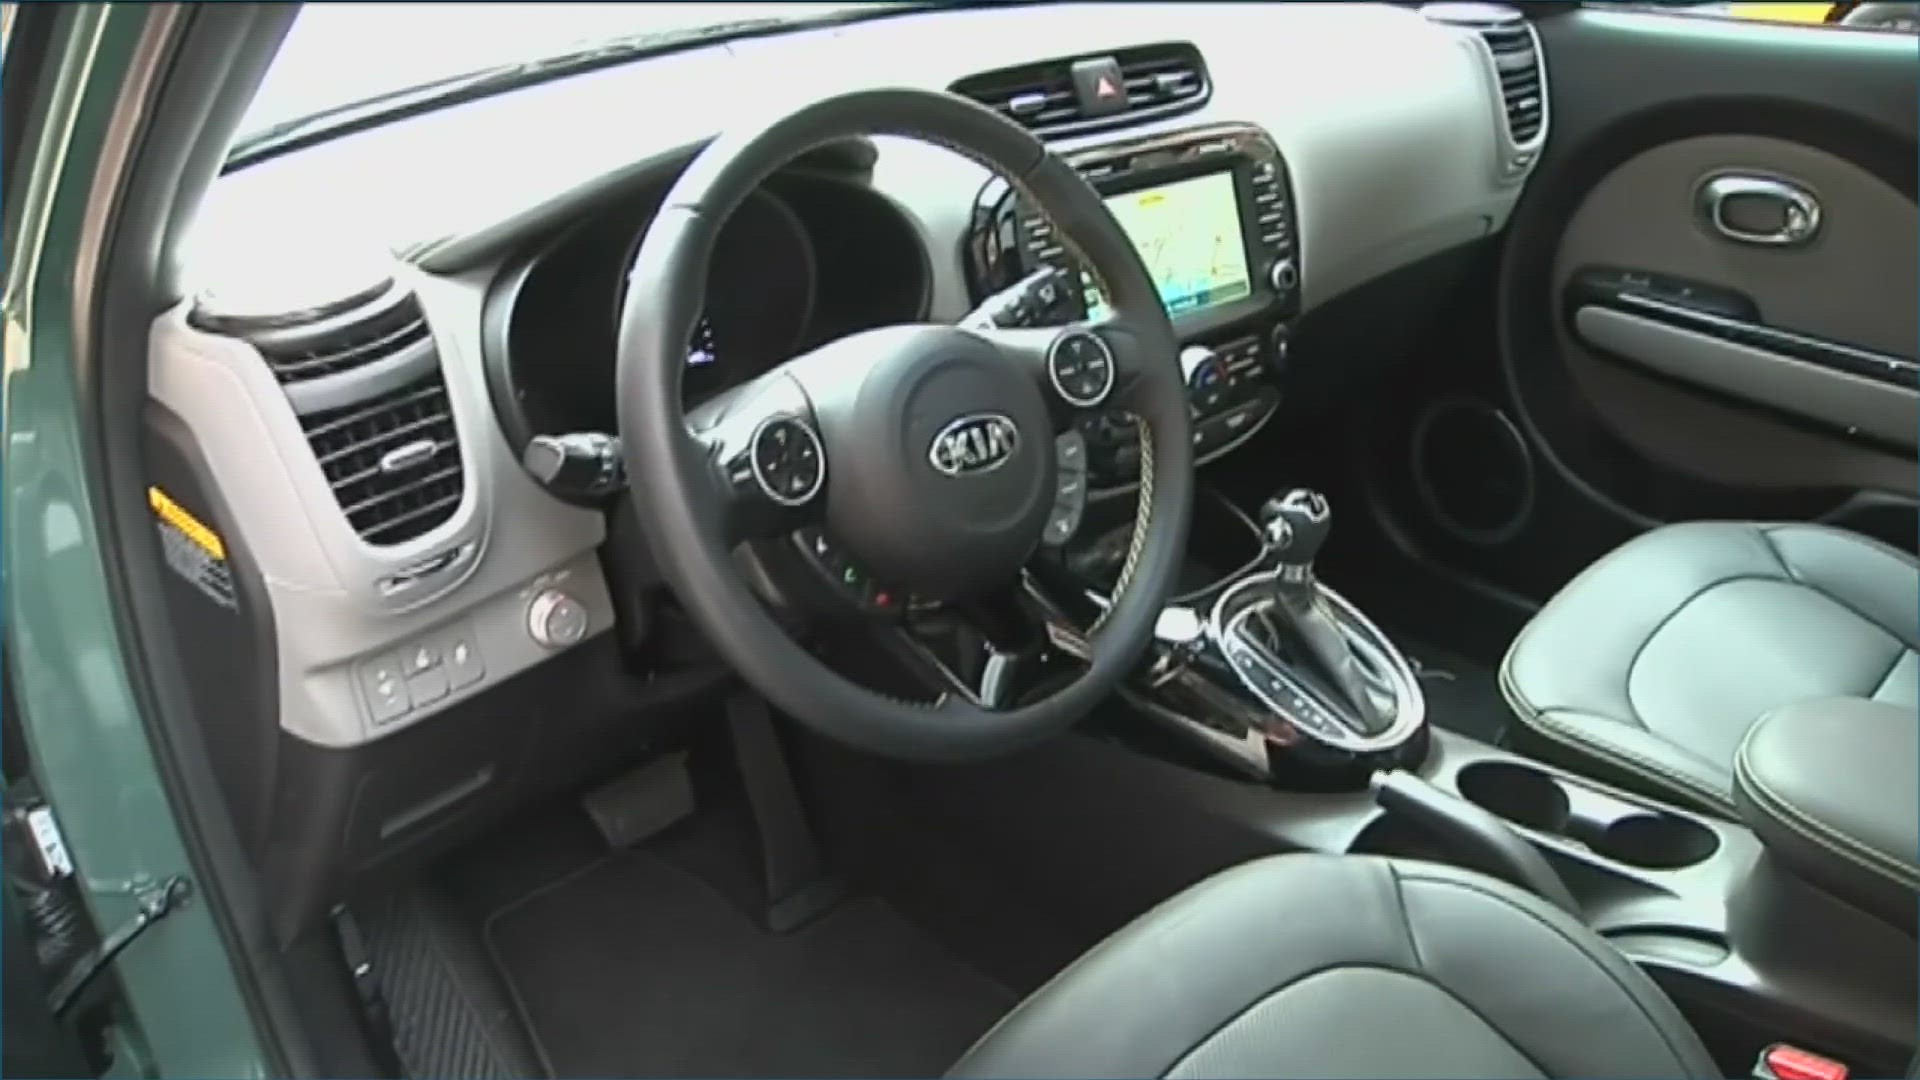 The San Diego City Attorney's Office sued automakers Hyundai and Kia for allegedly failing to equip their vehicles with sufficient anti-theft technology.